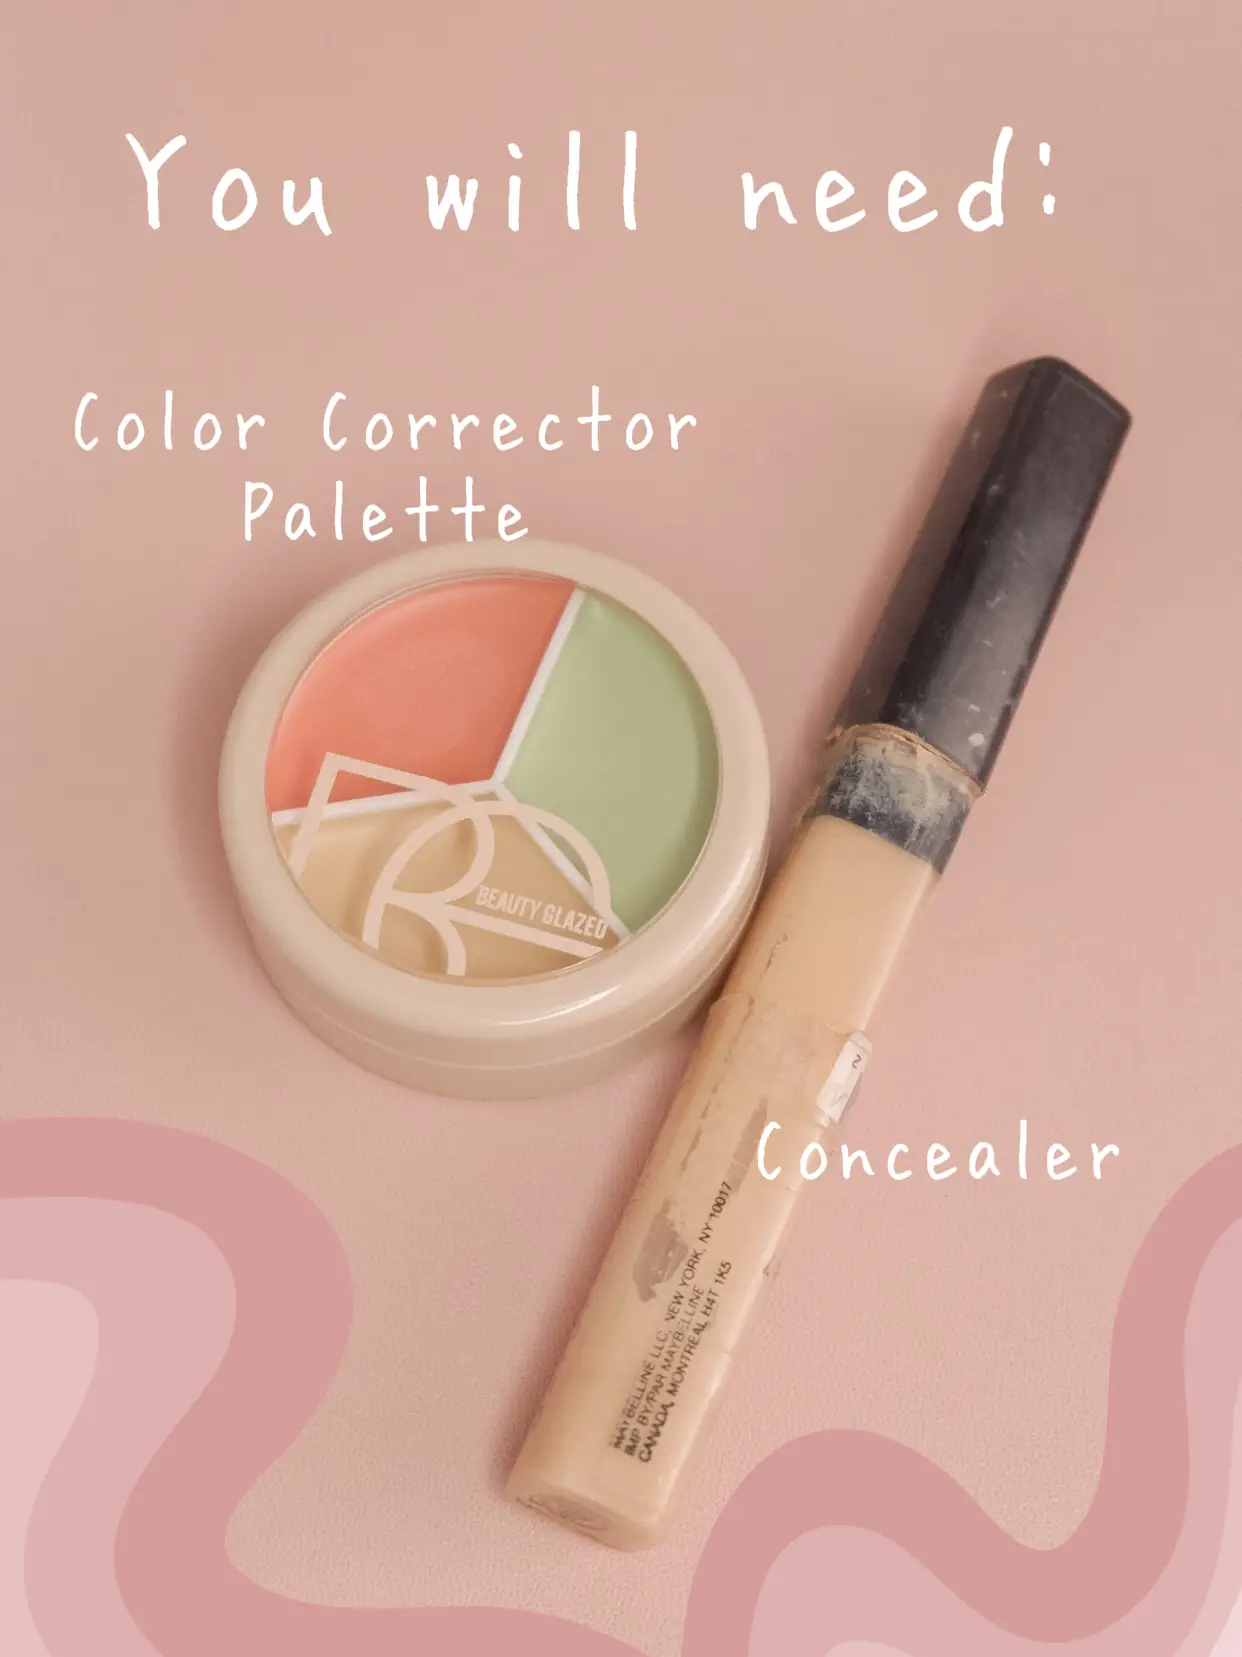 How to Color Correct Dark Circles? | Gallery posted by Richelle | Lemon8